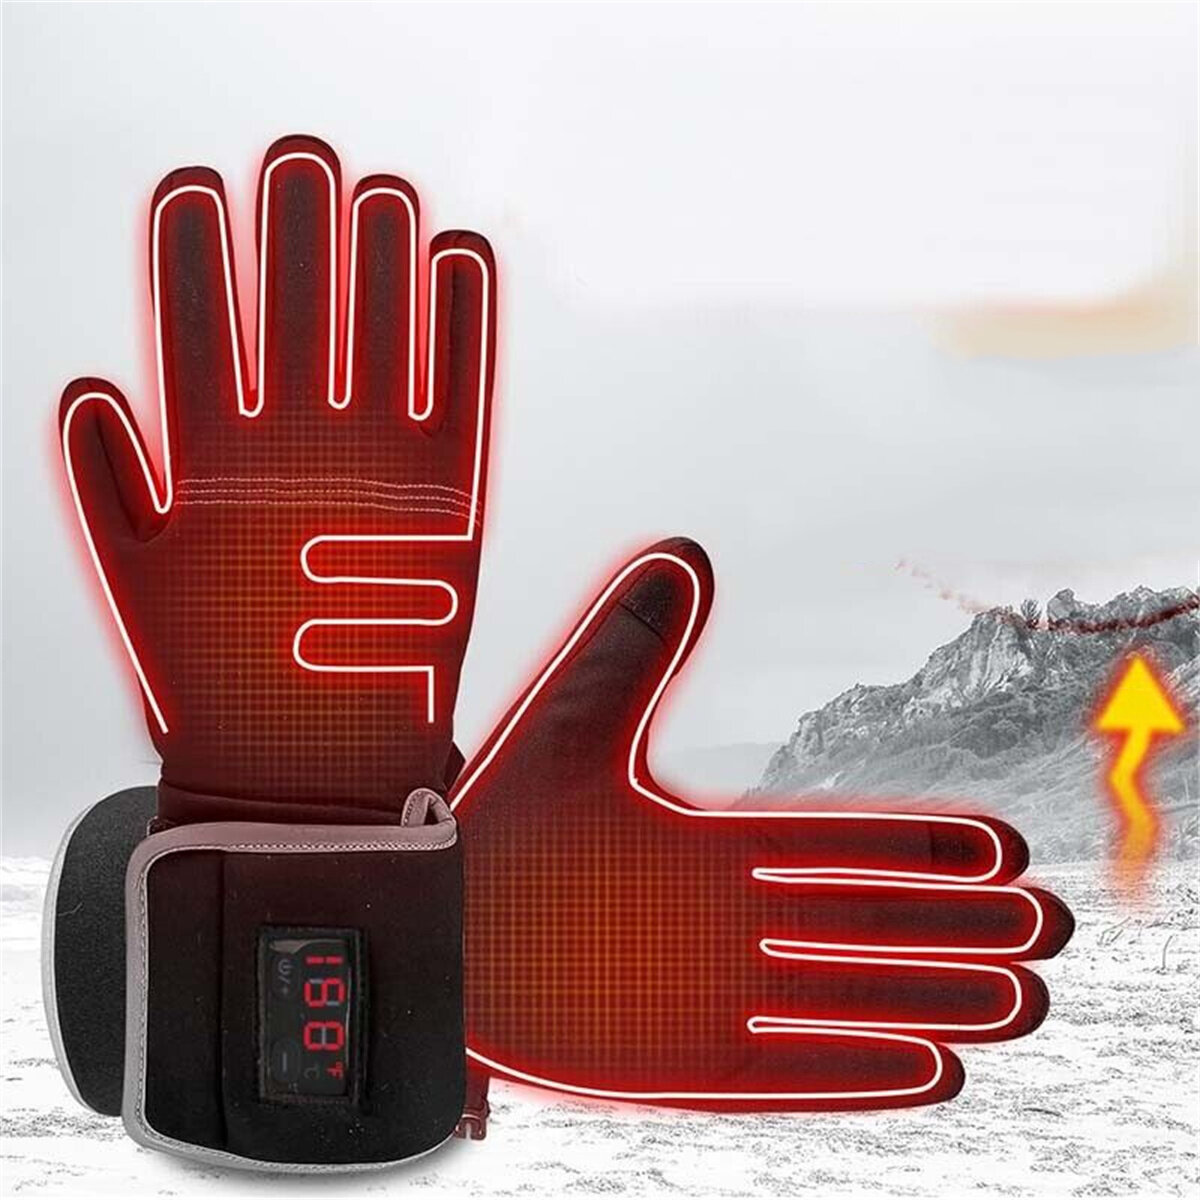 Electric Heated Gloves Rechargeable 2200mAh Waterproof Warm for Women Men with LED Temperature Display for Sports Outdoo